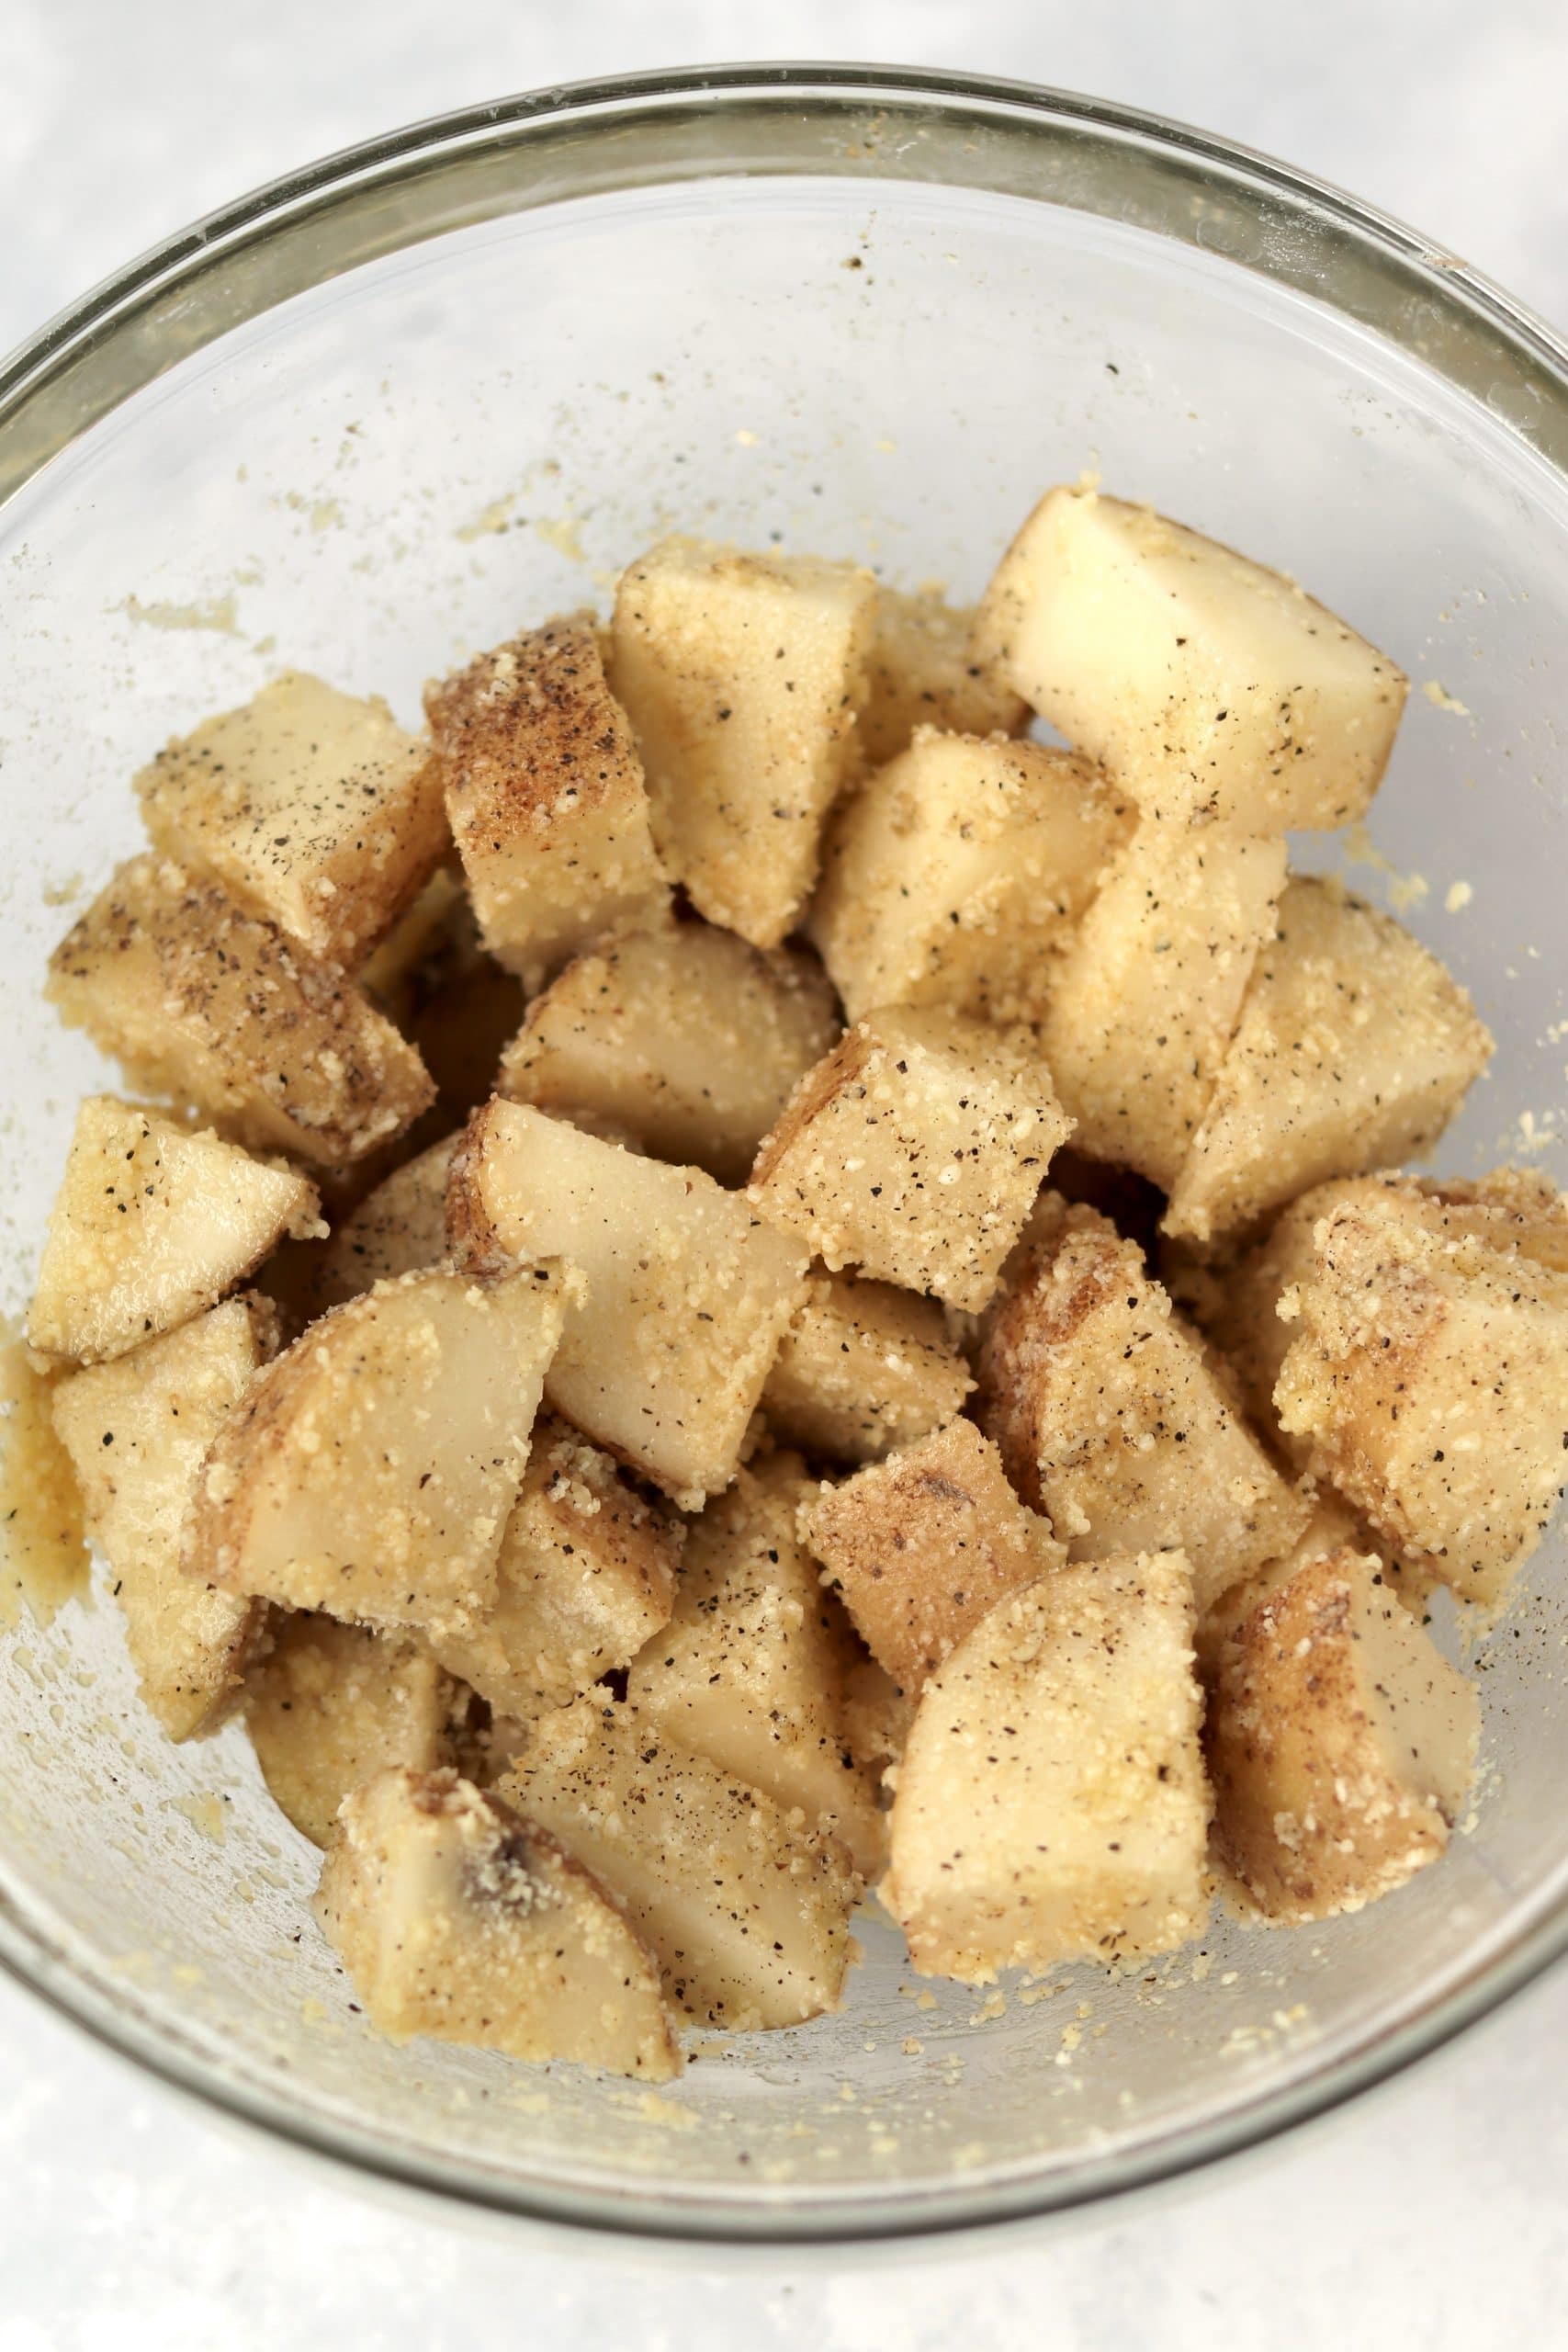 Cubed russet potatoes in bowl